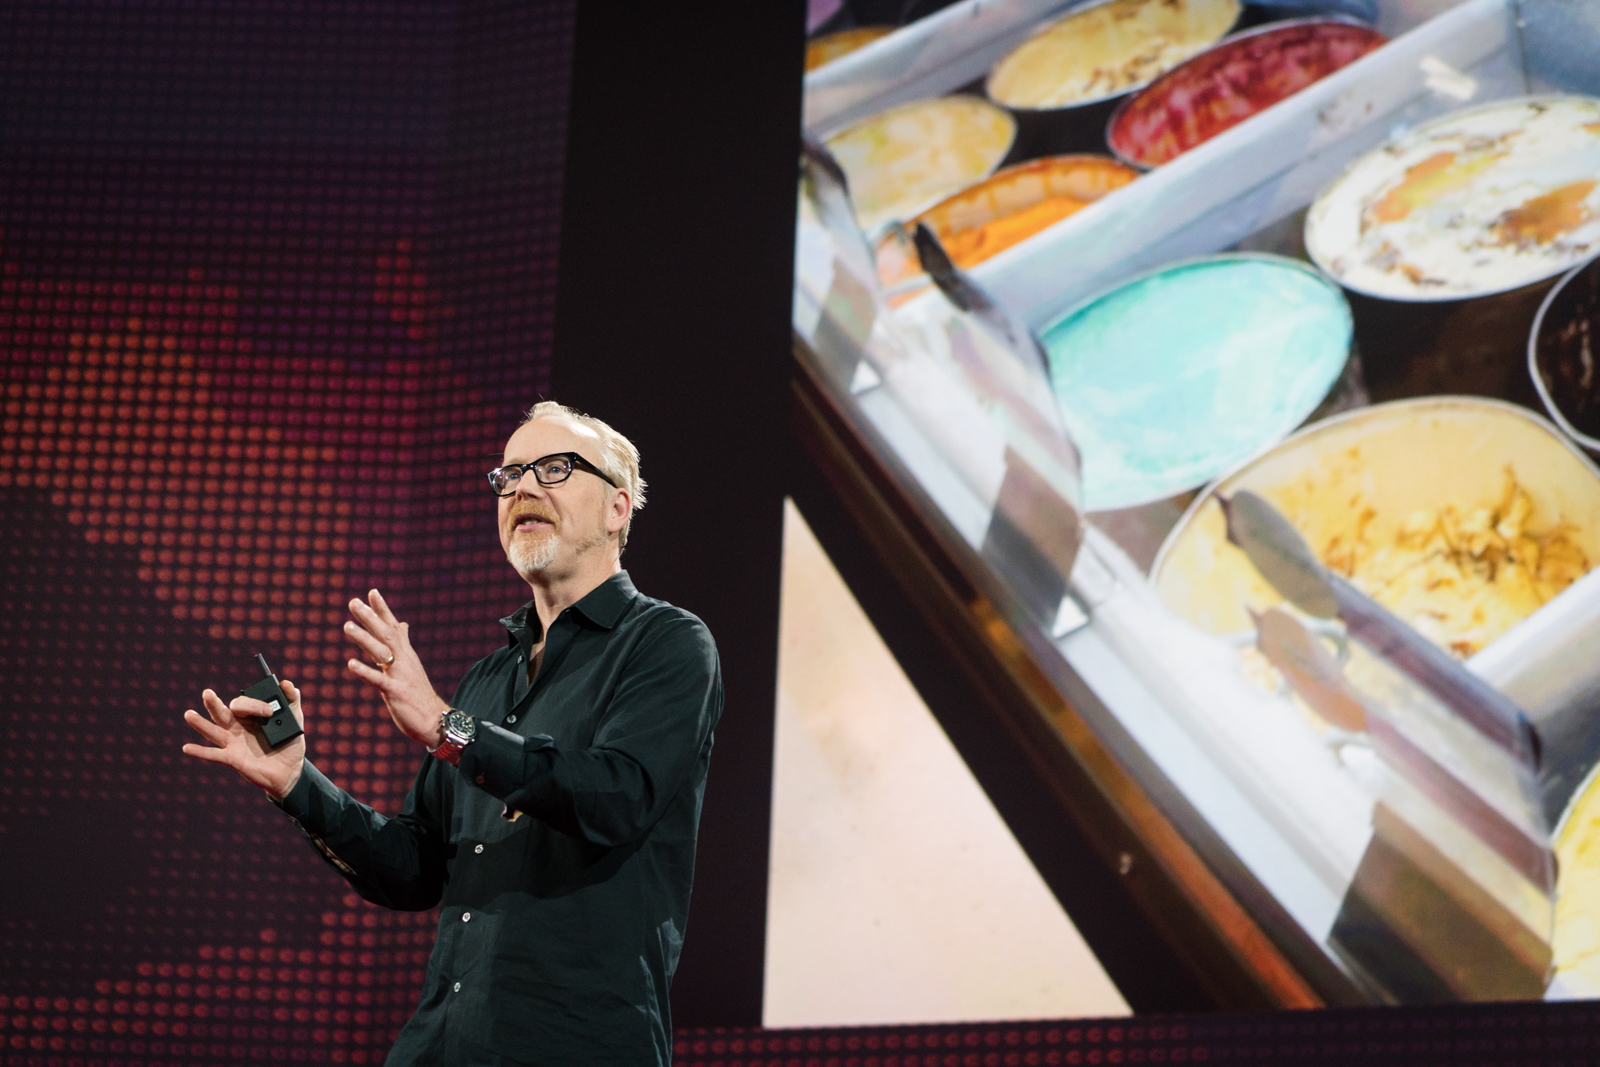 Adam Savage speaks at TED2016 - Dream, February 15-19, 2016, Vancouver Convention Center, Vancouver, Canada. Photo: Bret Hartman / TED